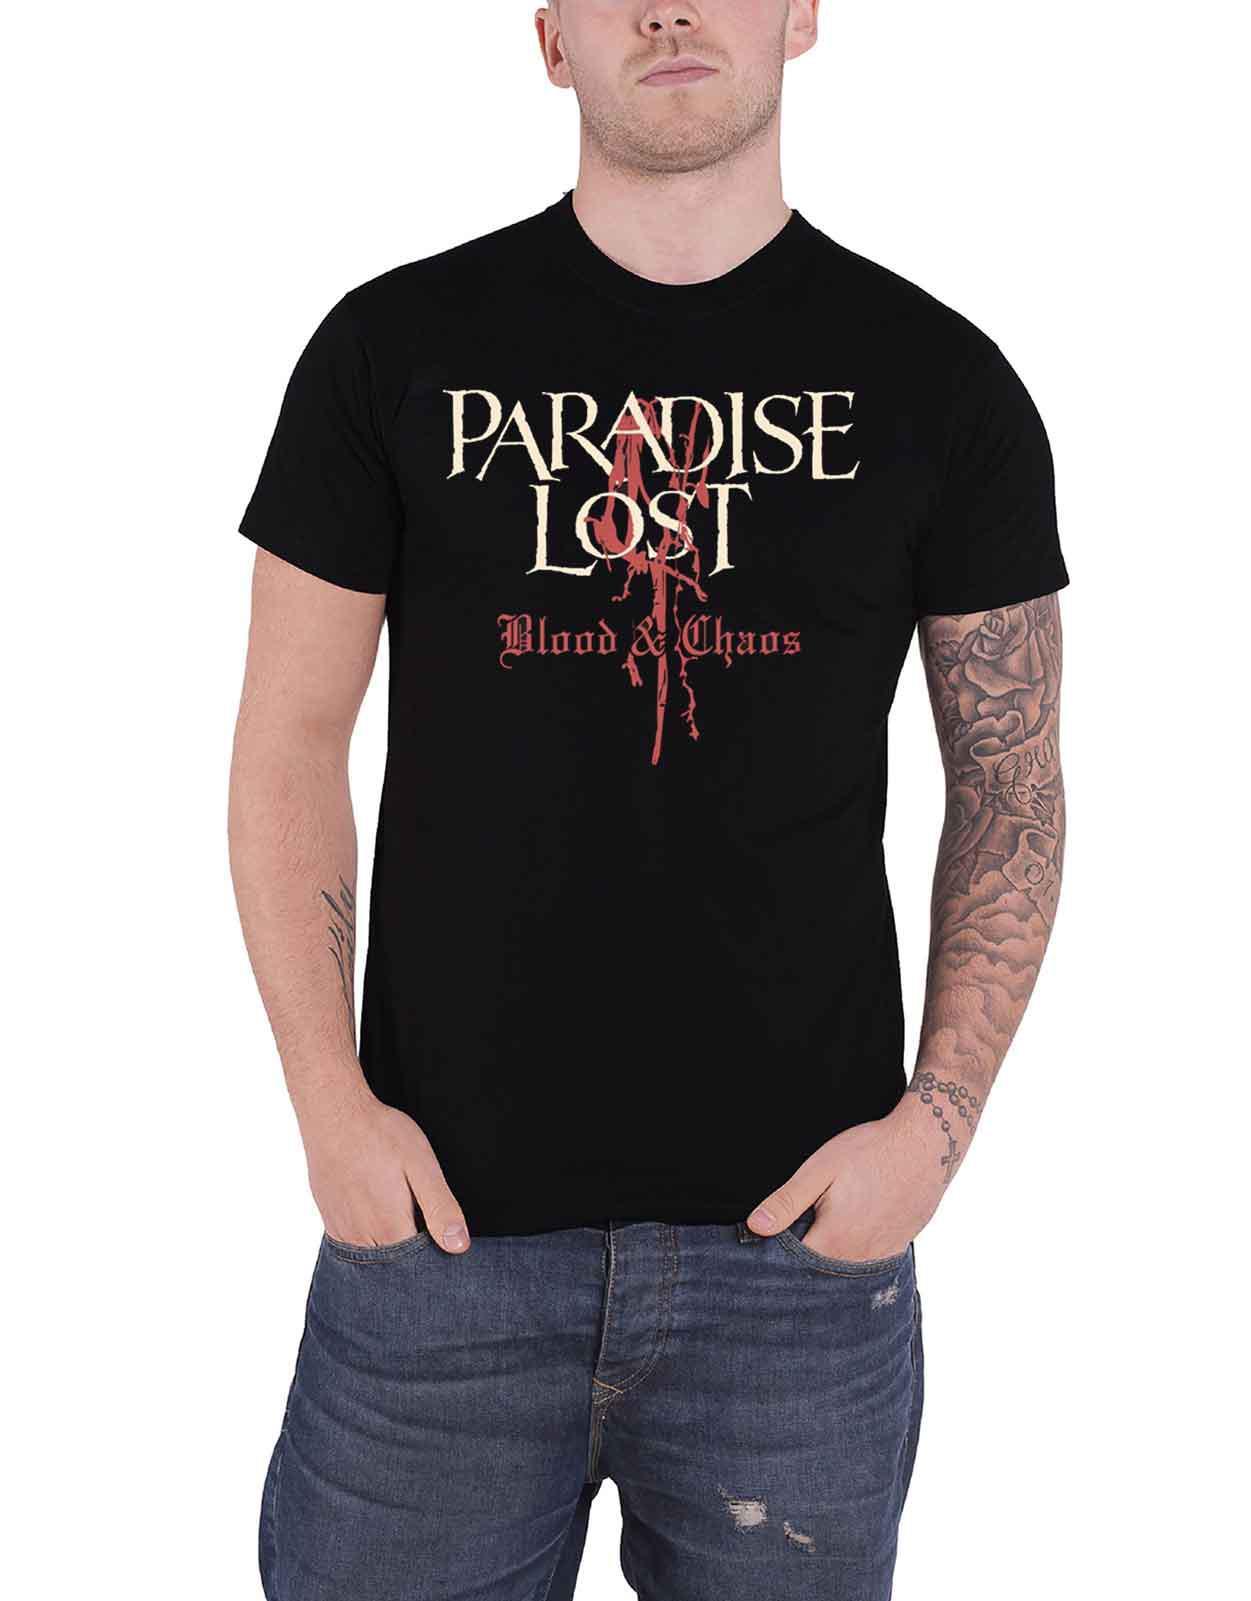 Paradise Lost T Shirt Blood And Chaos Band Logo new Official Mens Black